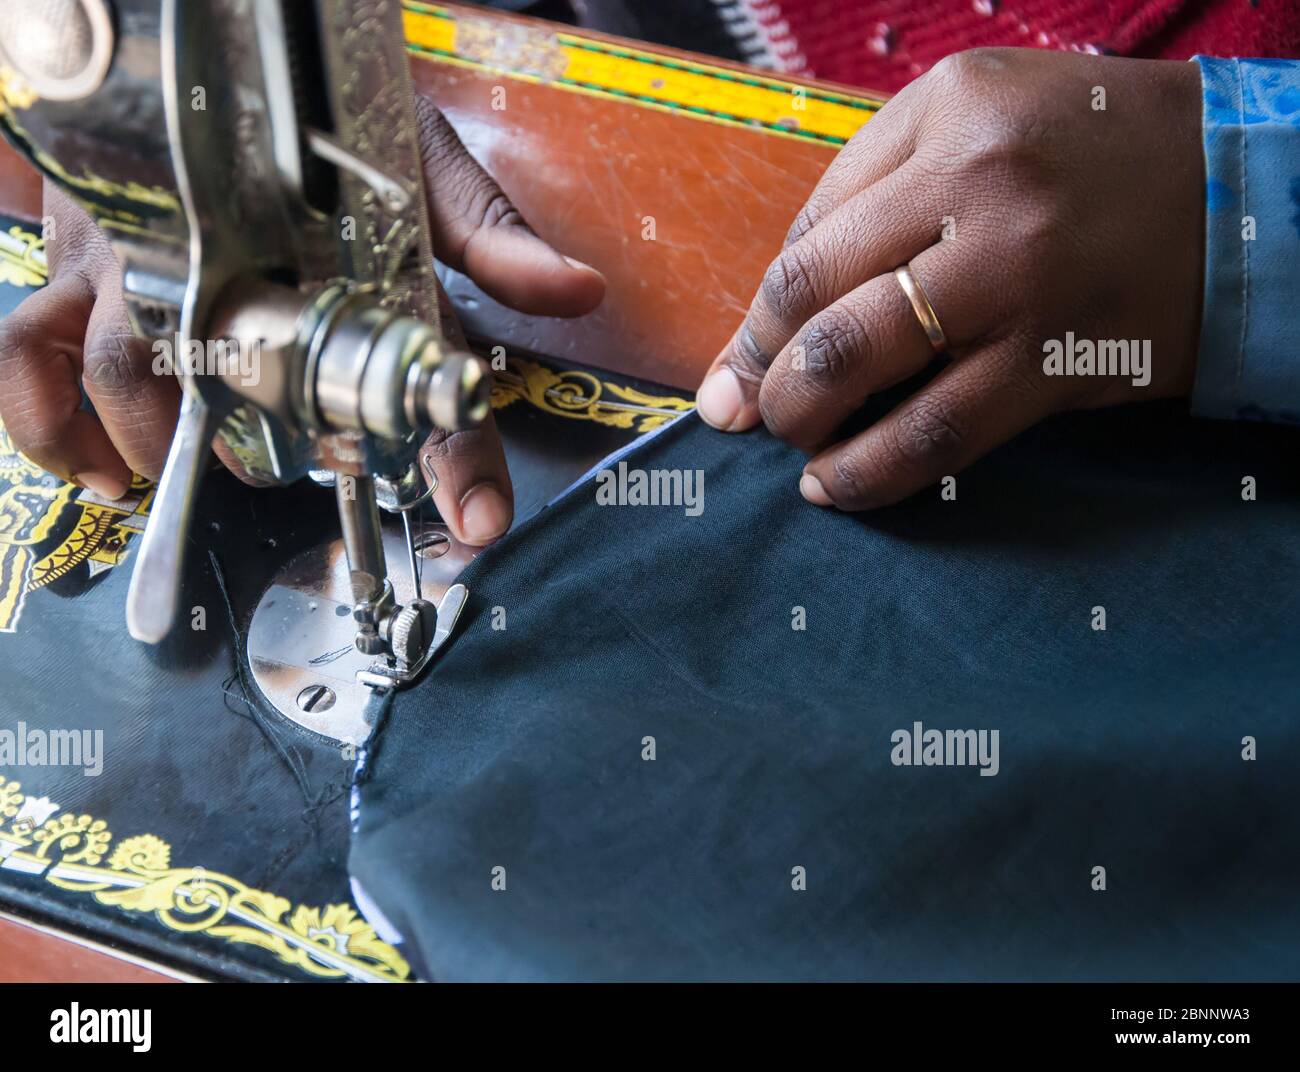 Closeup of African woman's hand wearing a wedding band, sewing on a sewing machine. Stock Photo